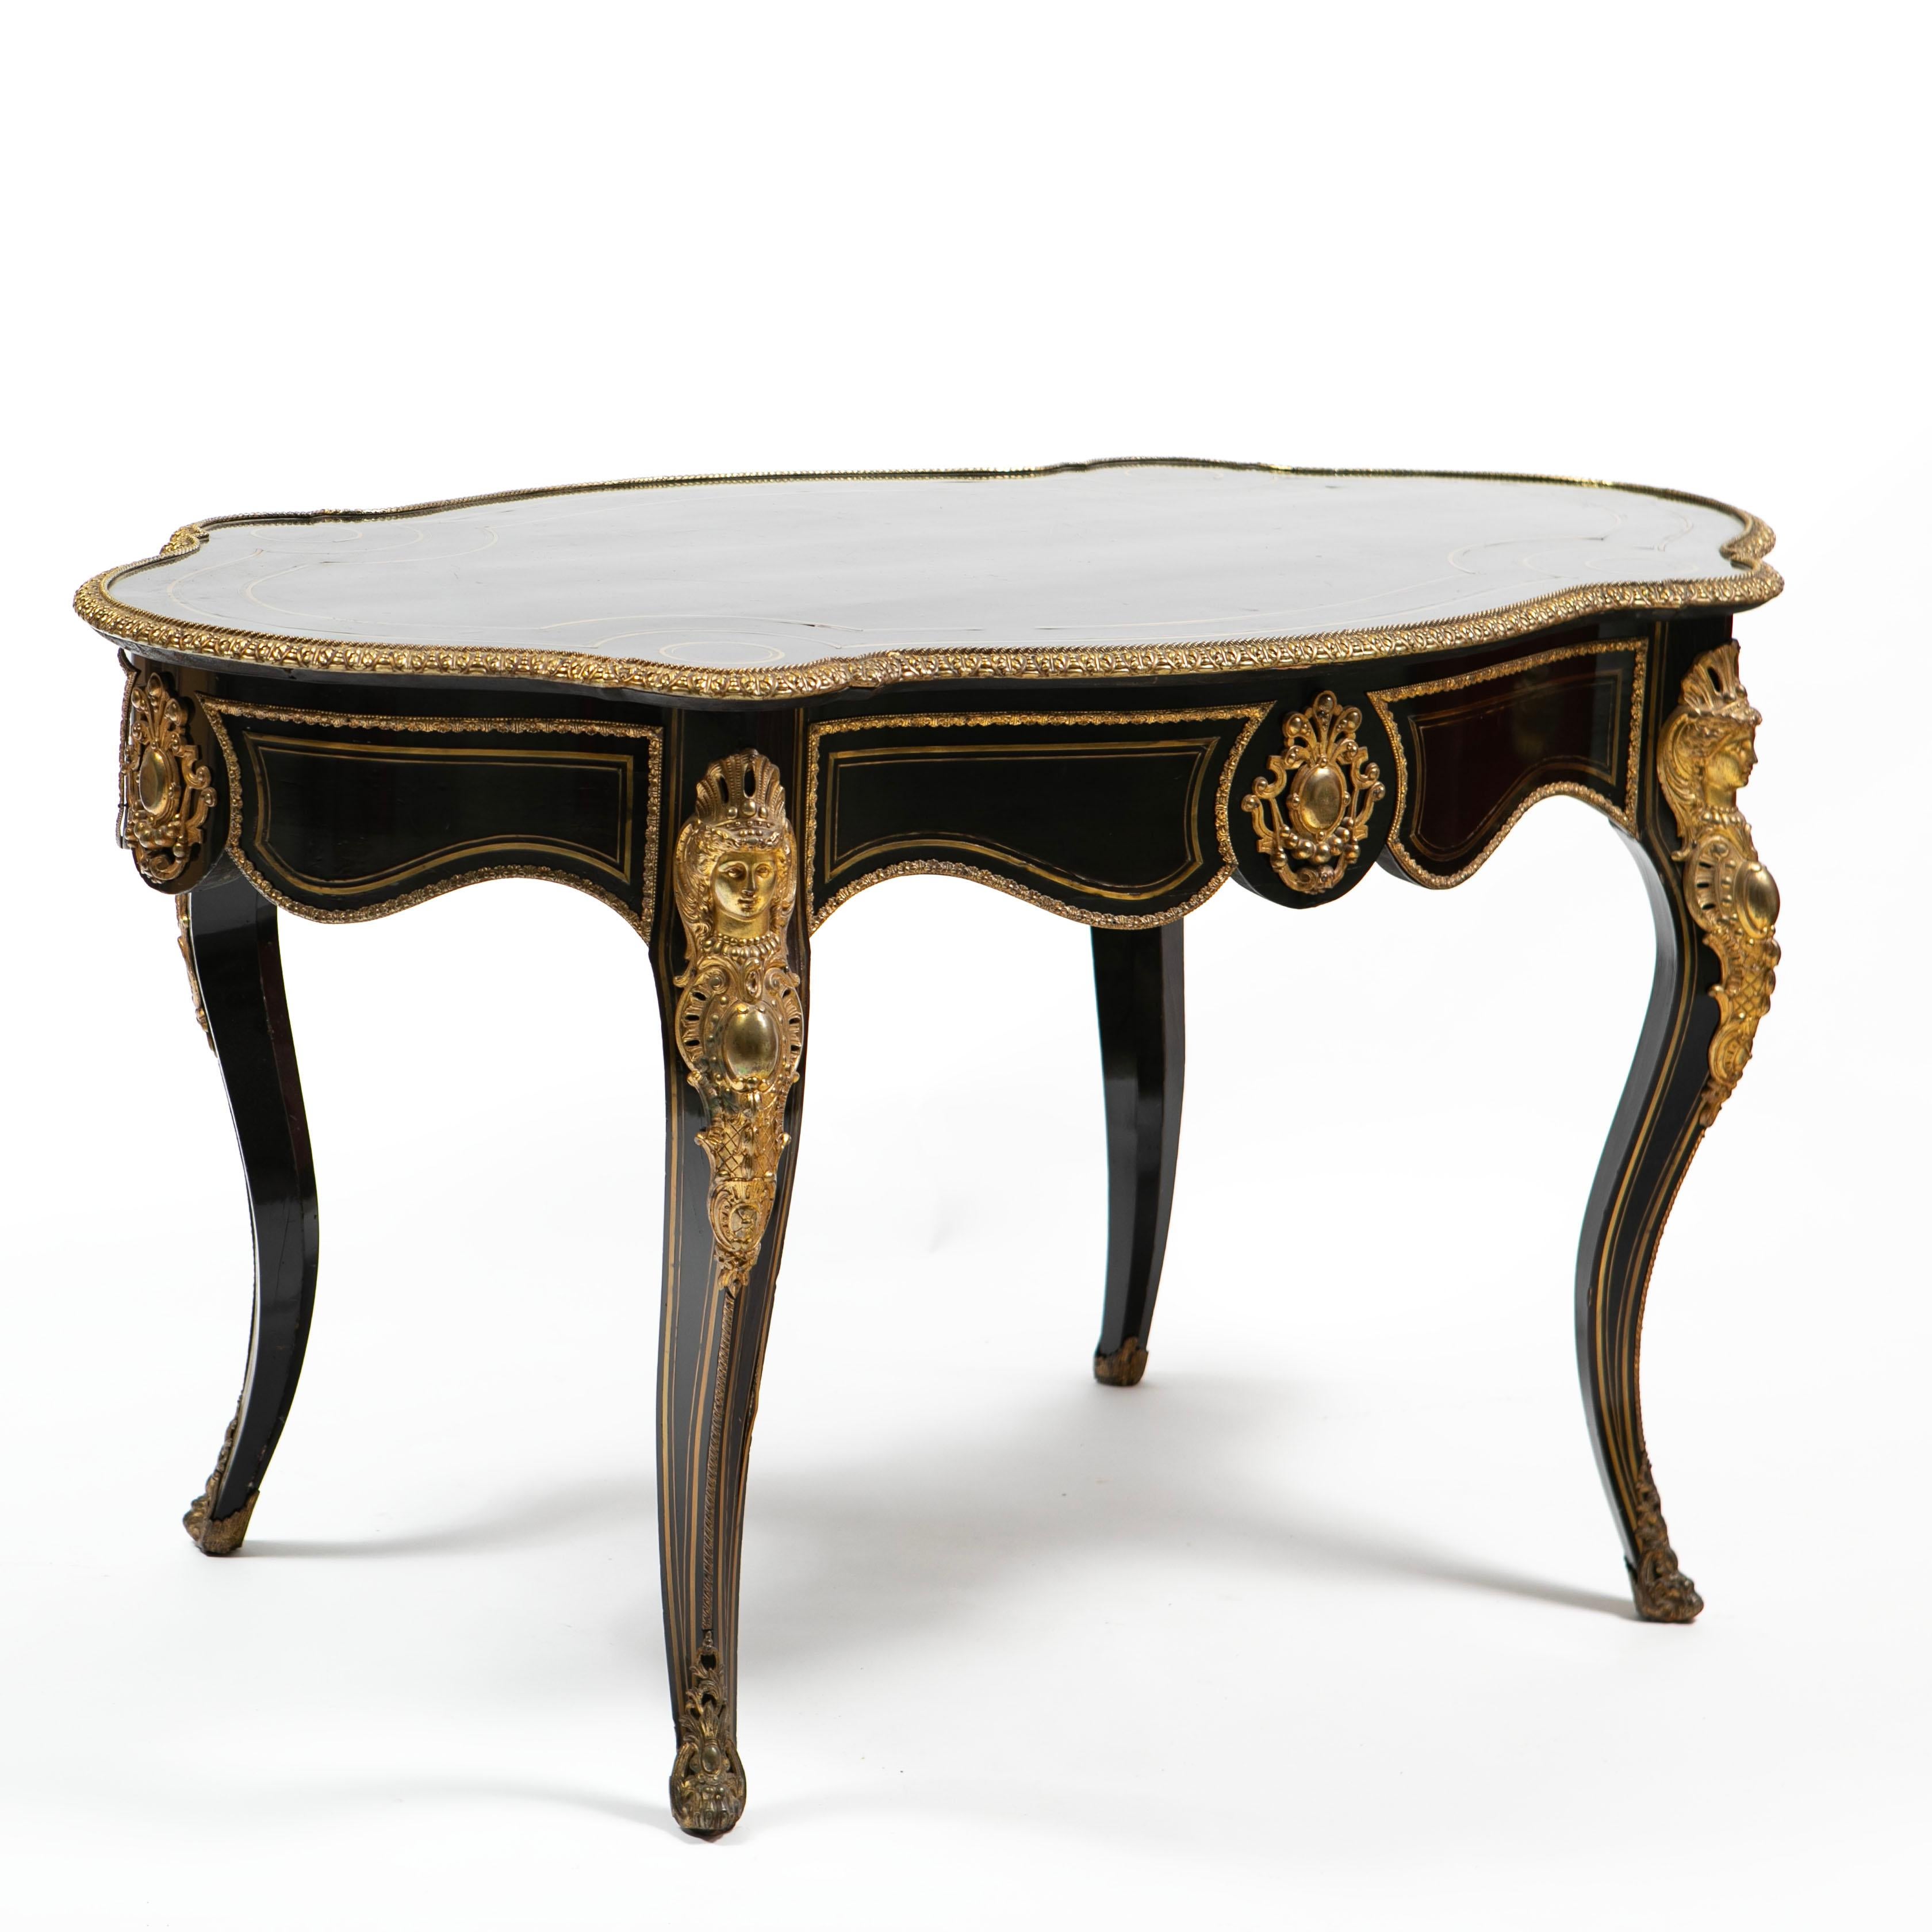 A French Napoleon III serpentine console table or salon table in ebonized wood with elaborate and fine ormolu details.
Four cabriolet legs, each leg decorated with an ormolu mount of a female figure. The table has a single drawer on the apron and